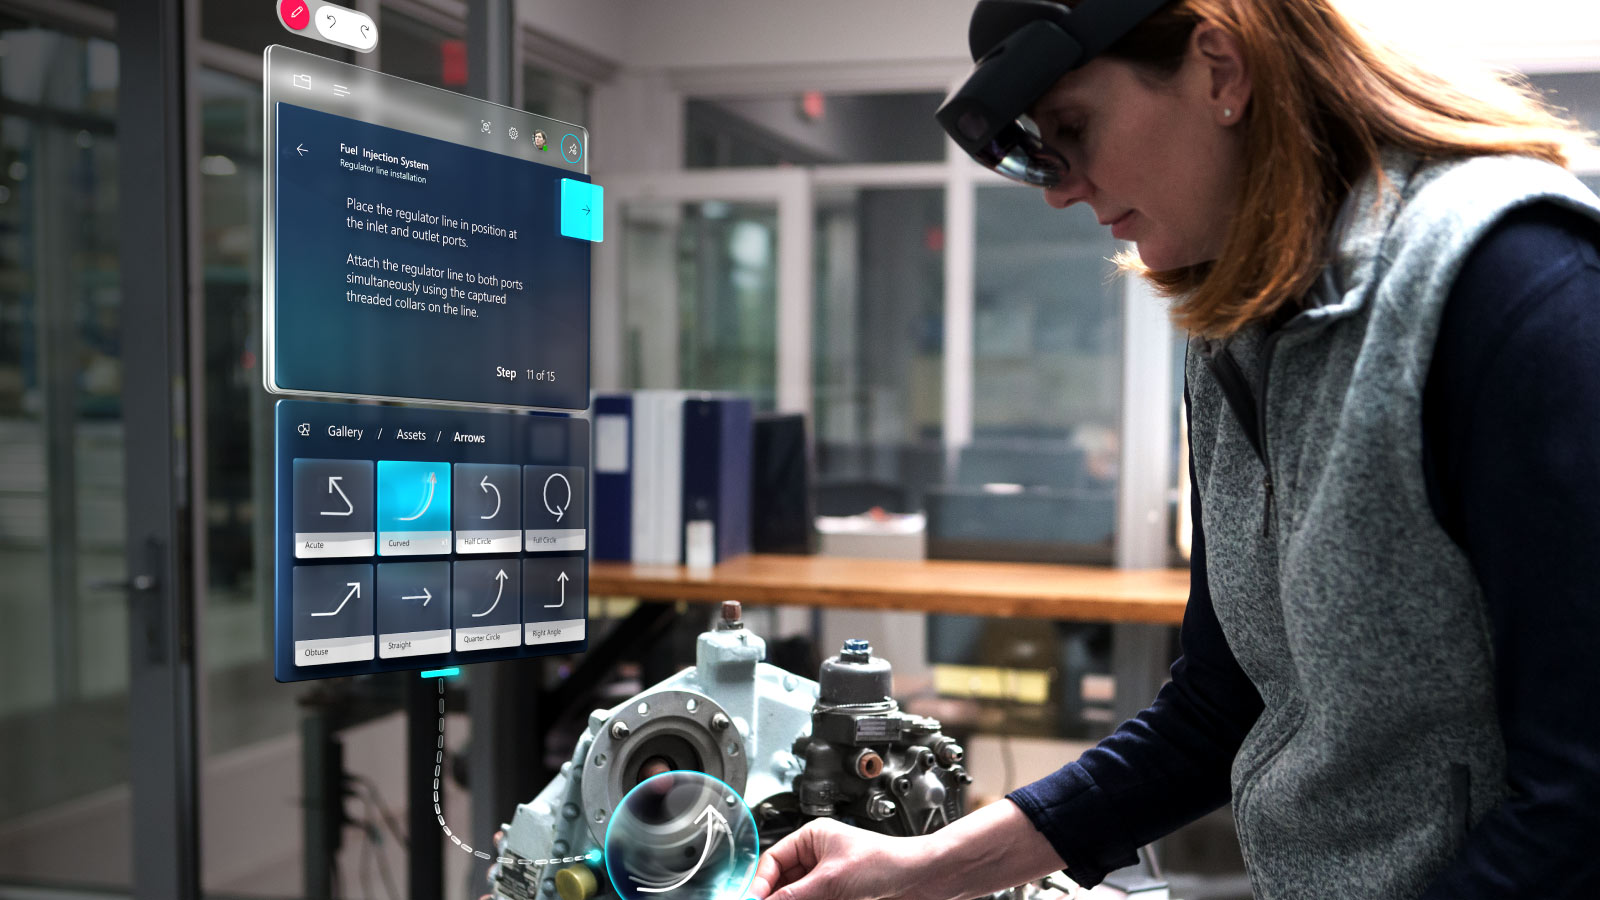 Dynamics 365 Artificial Intelligence and Mixed Reality